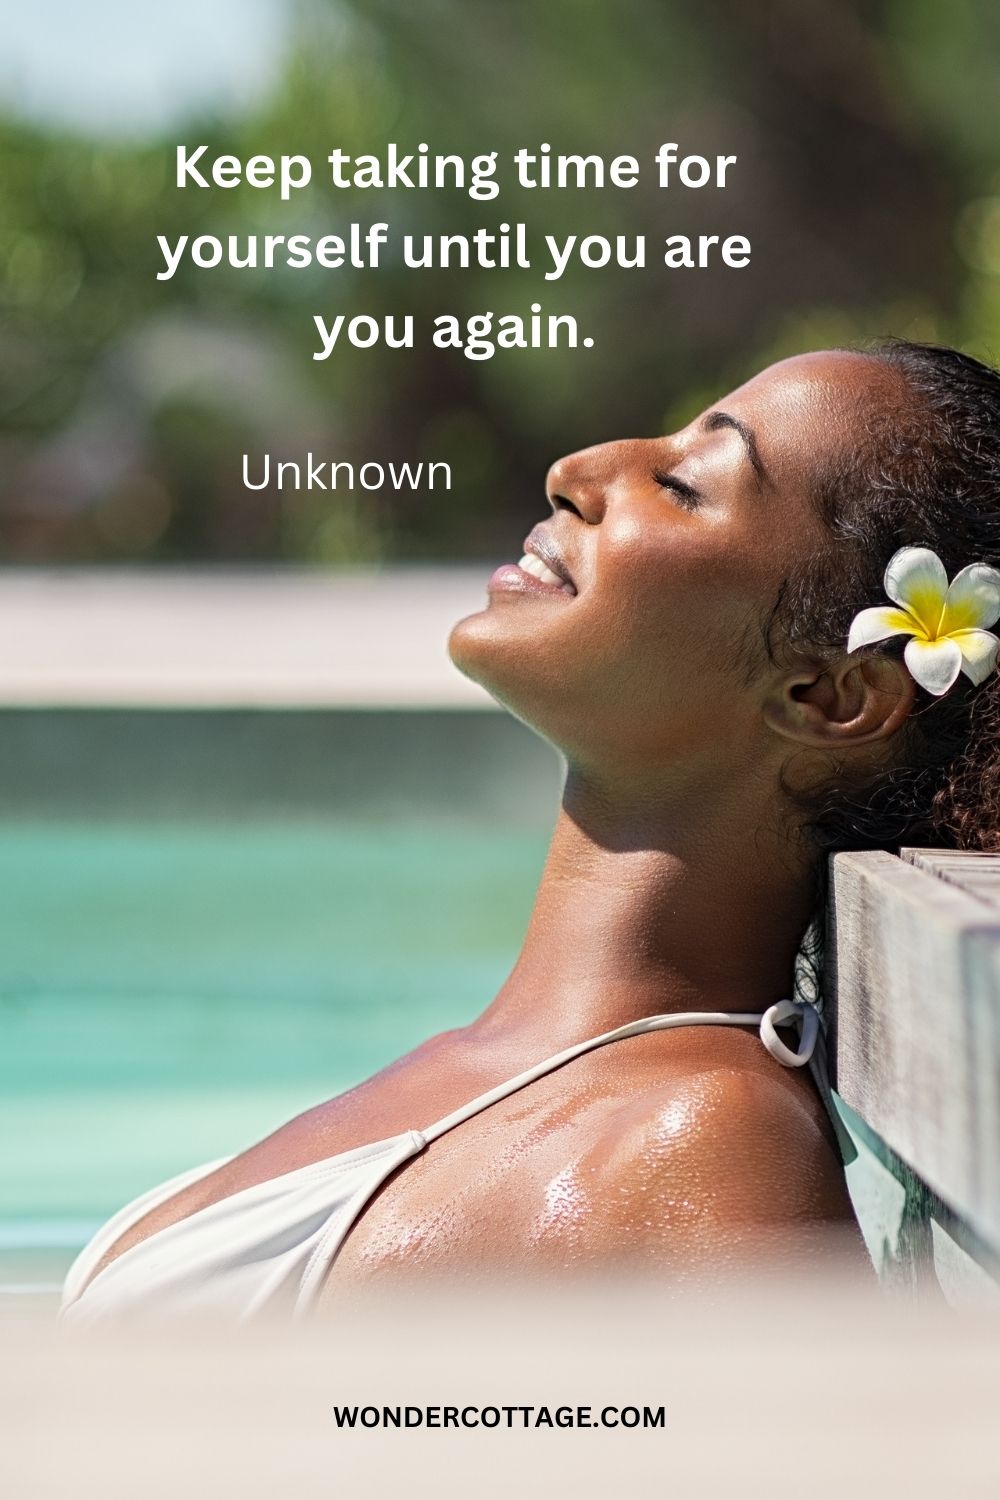 Keep taking time for yourself until you are you again. Unknown